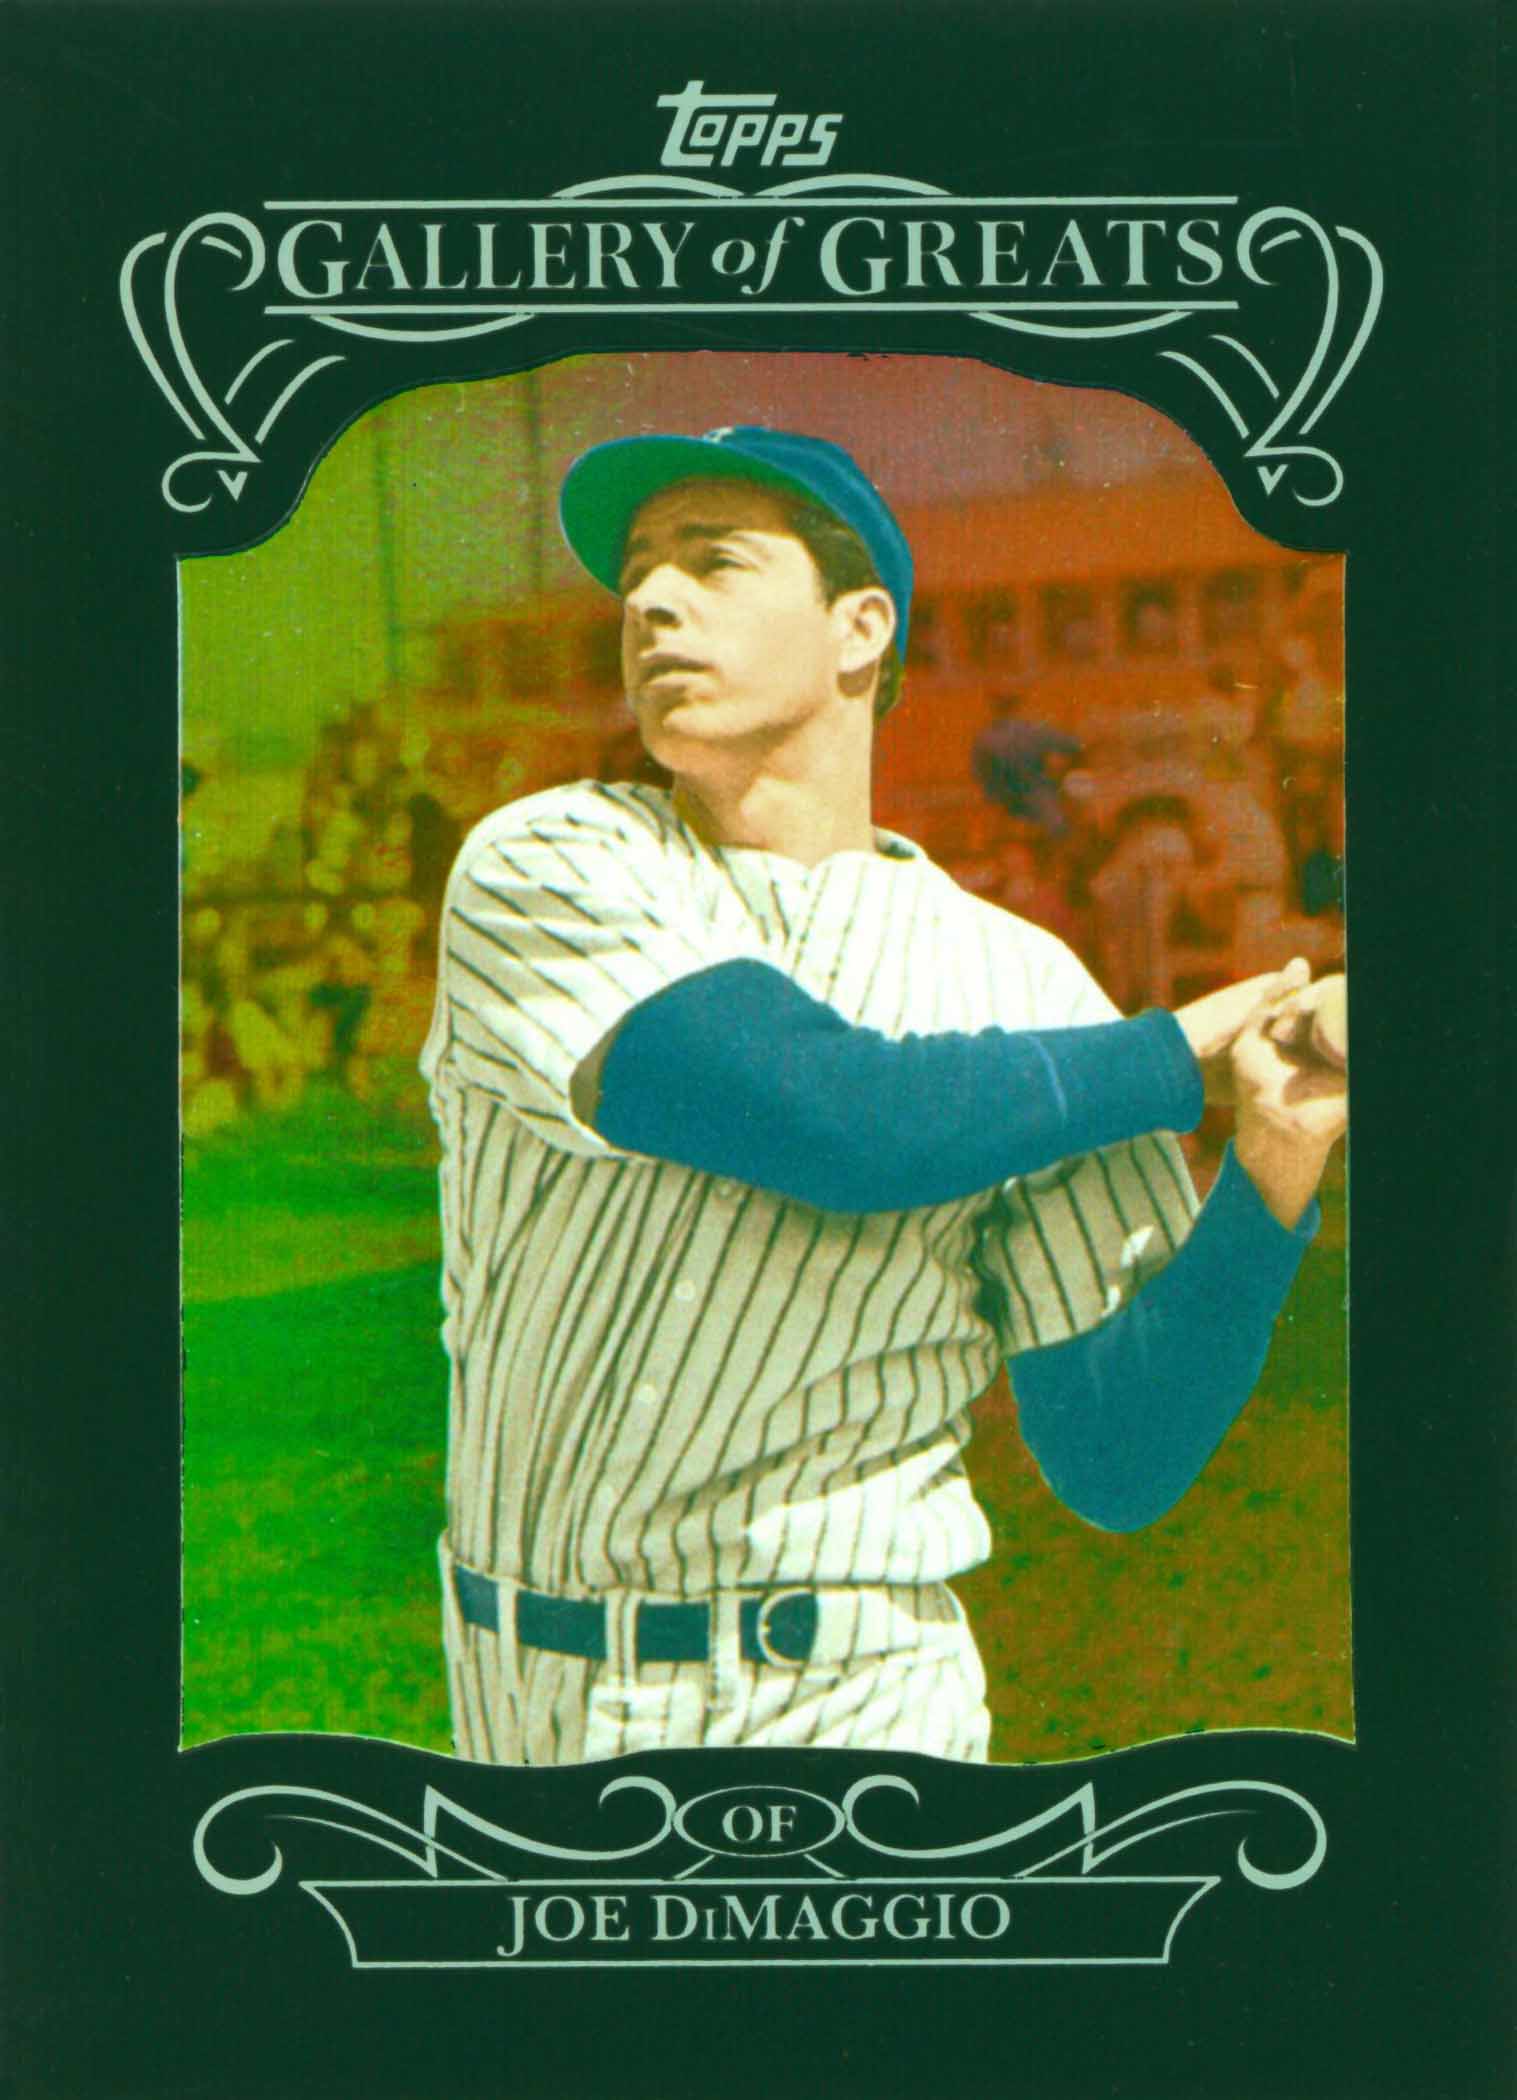 2015 Topps Gallery of Greats